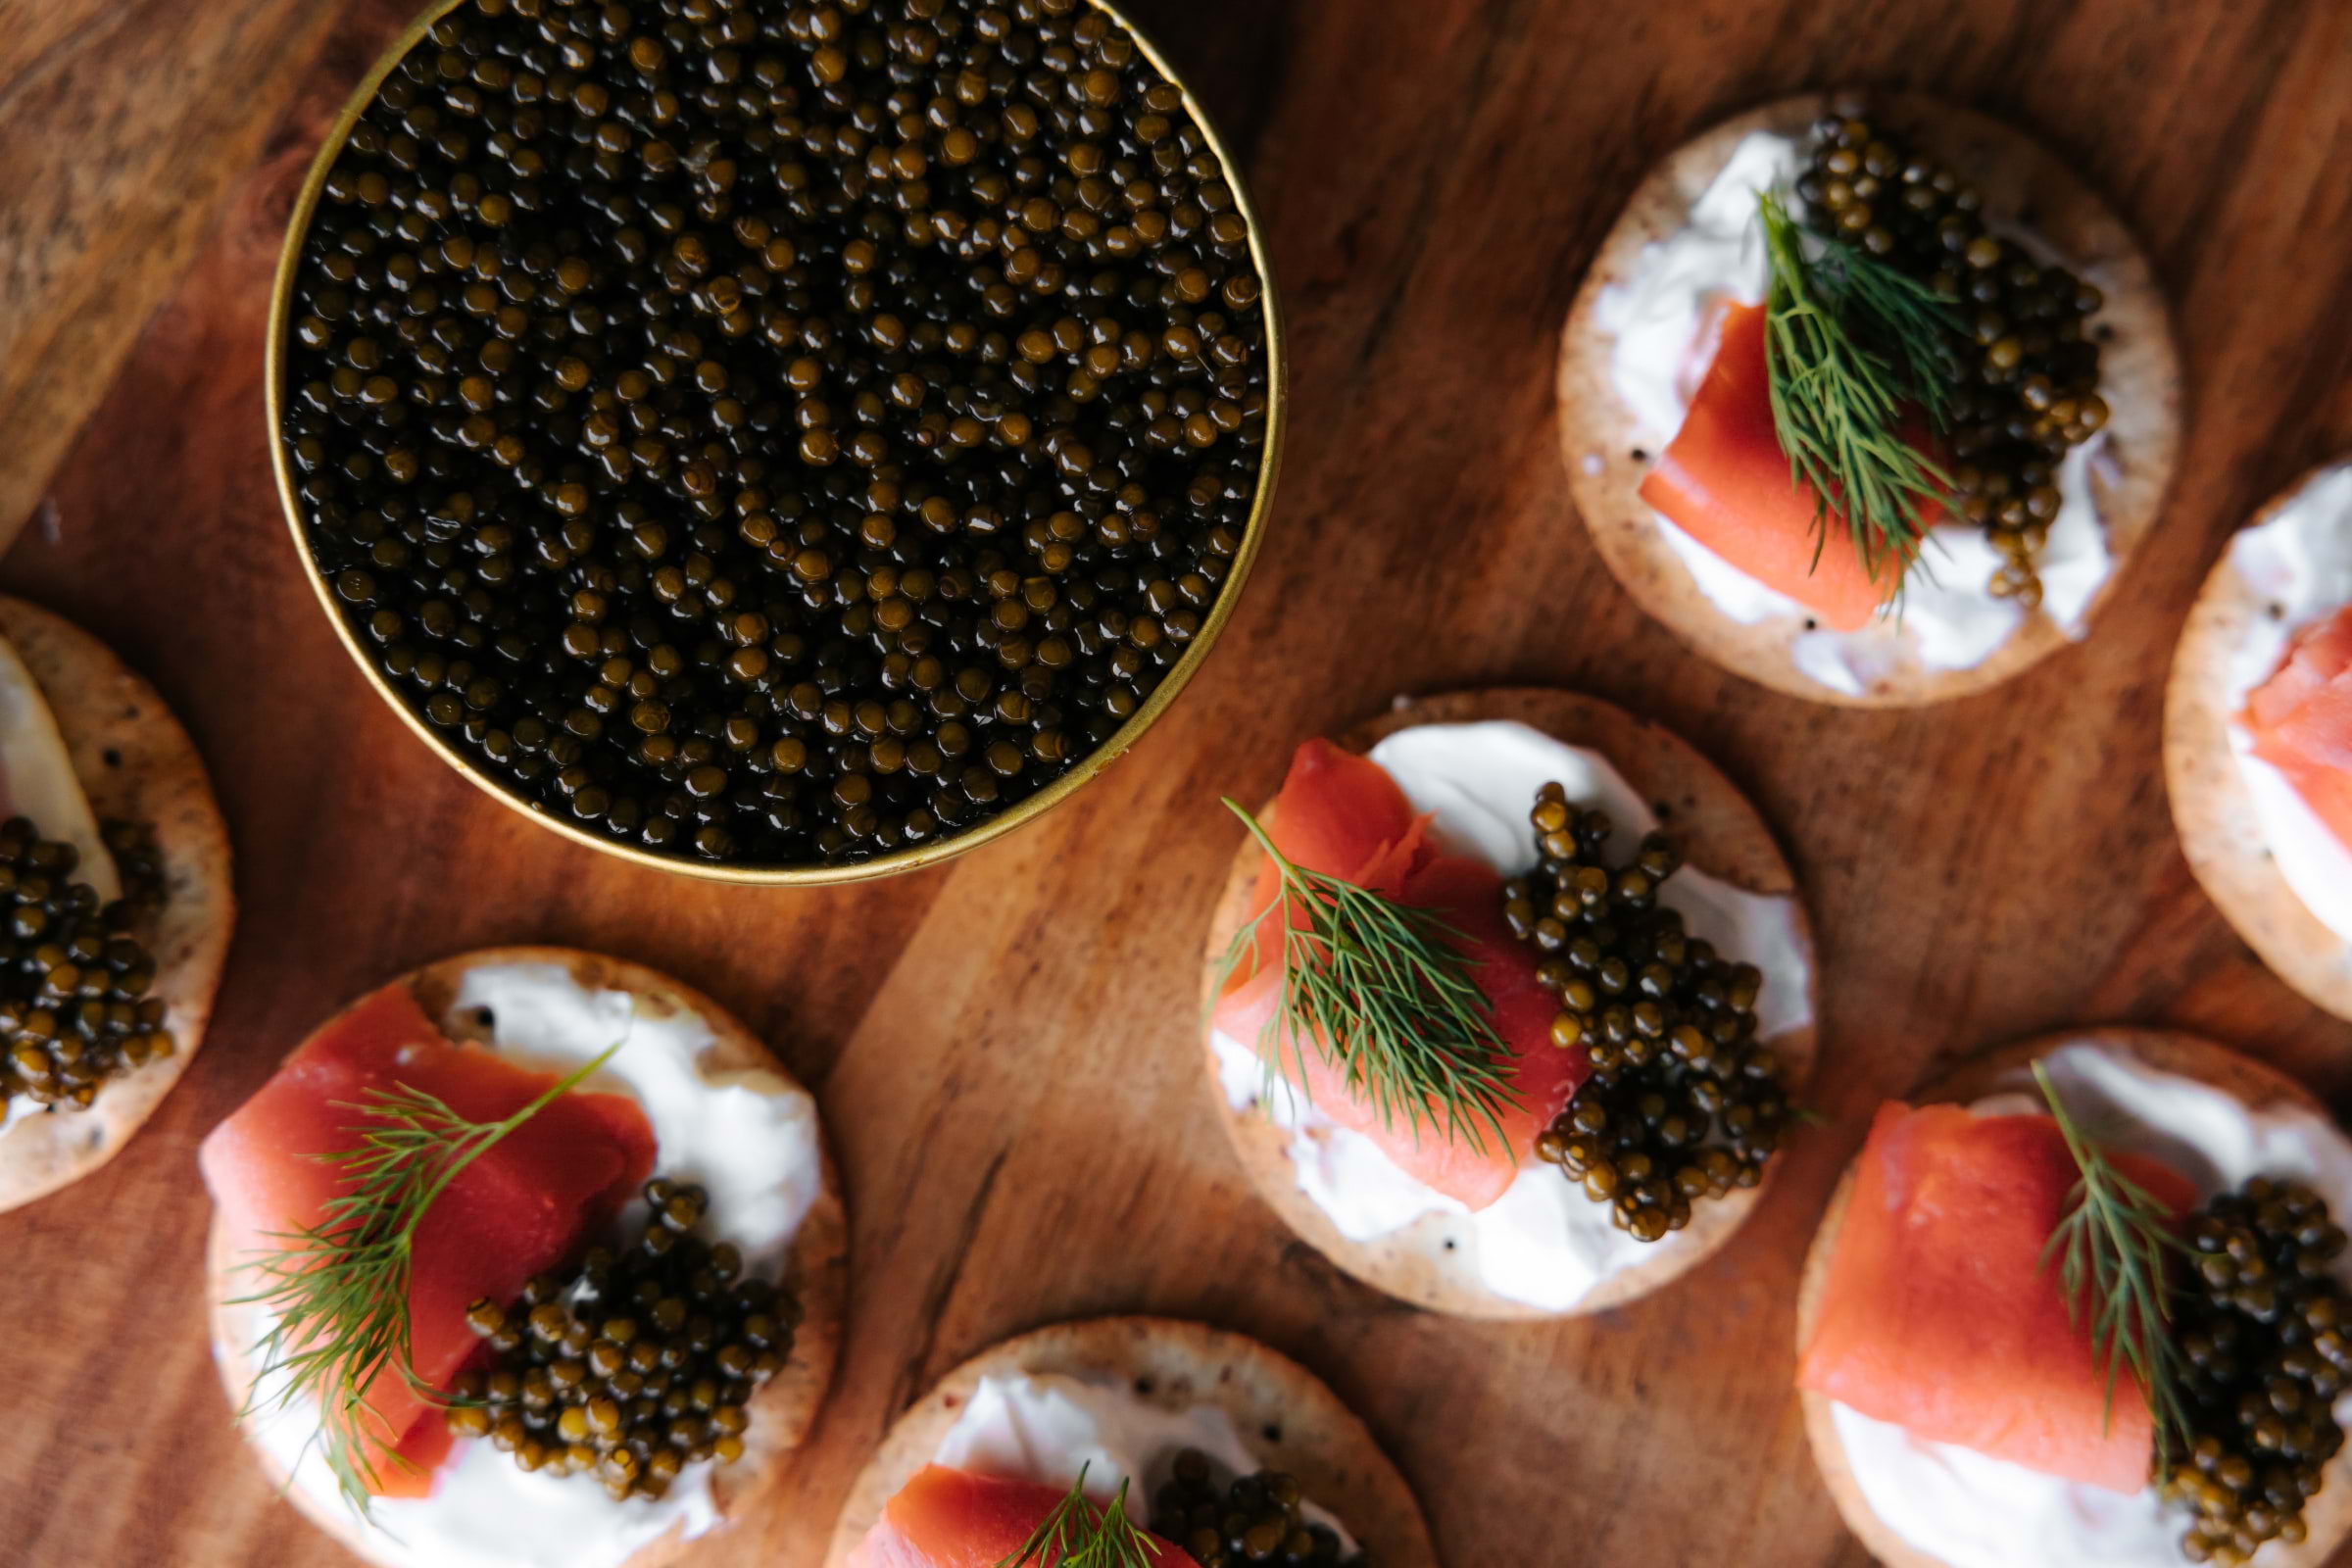 A caviar café and deli is coming to London next month